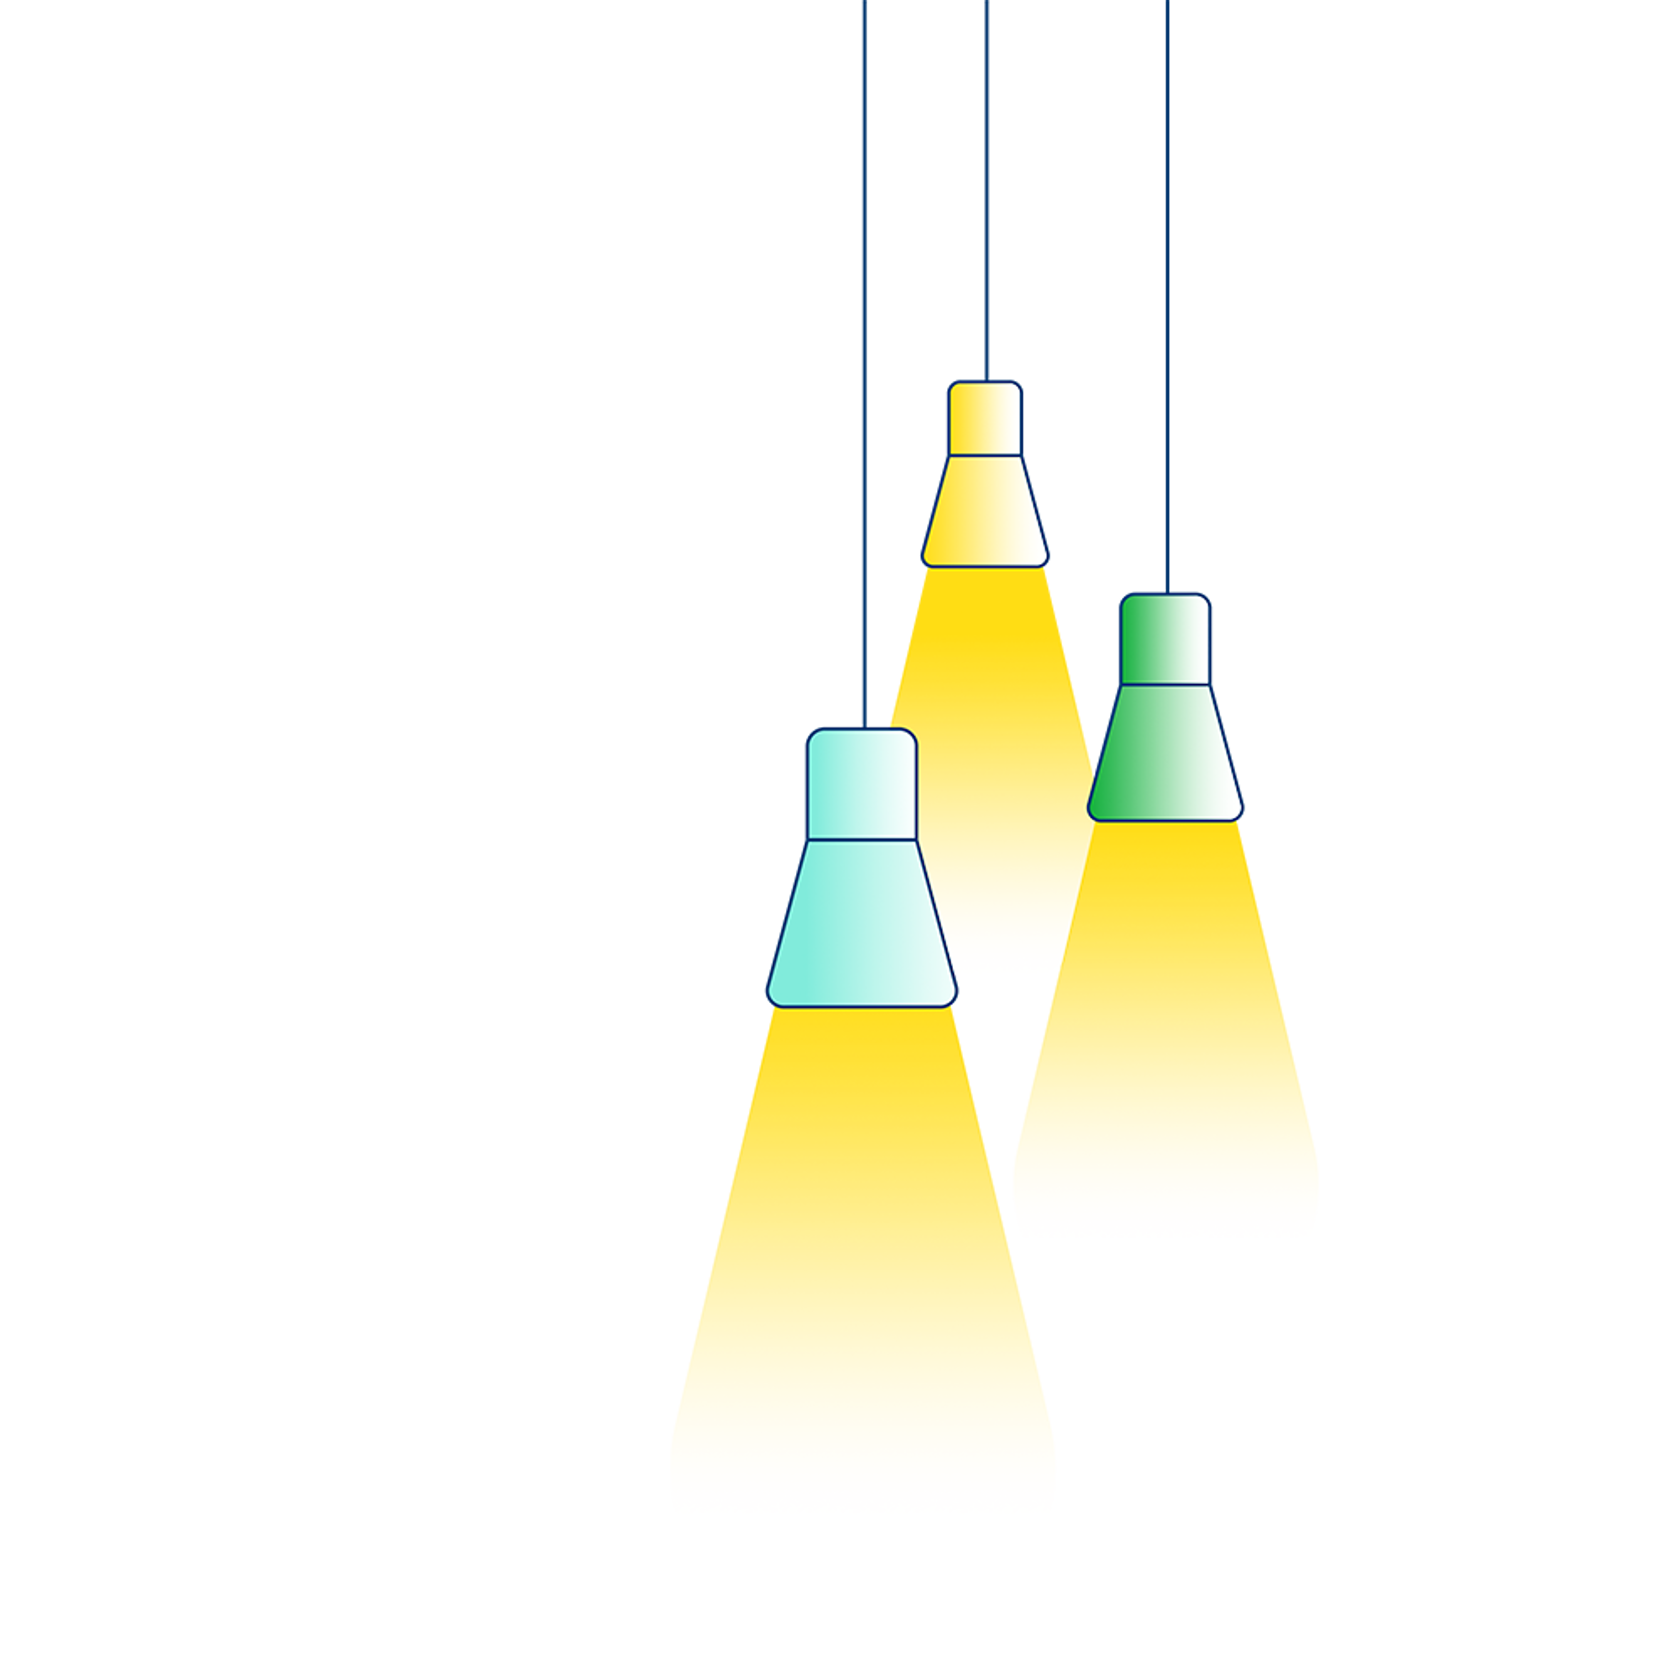 An illustration which shows three hanging lights with their bulbs switched on.